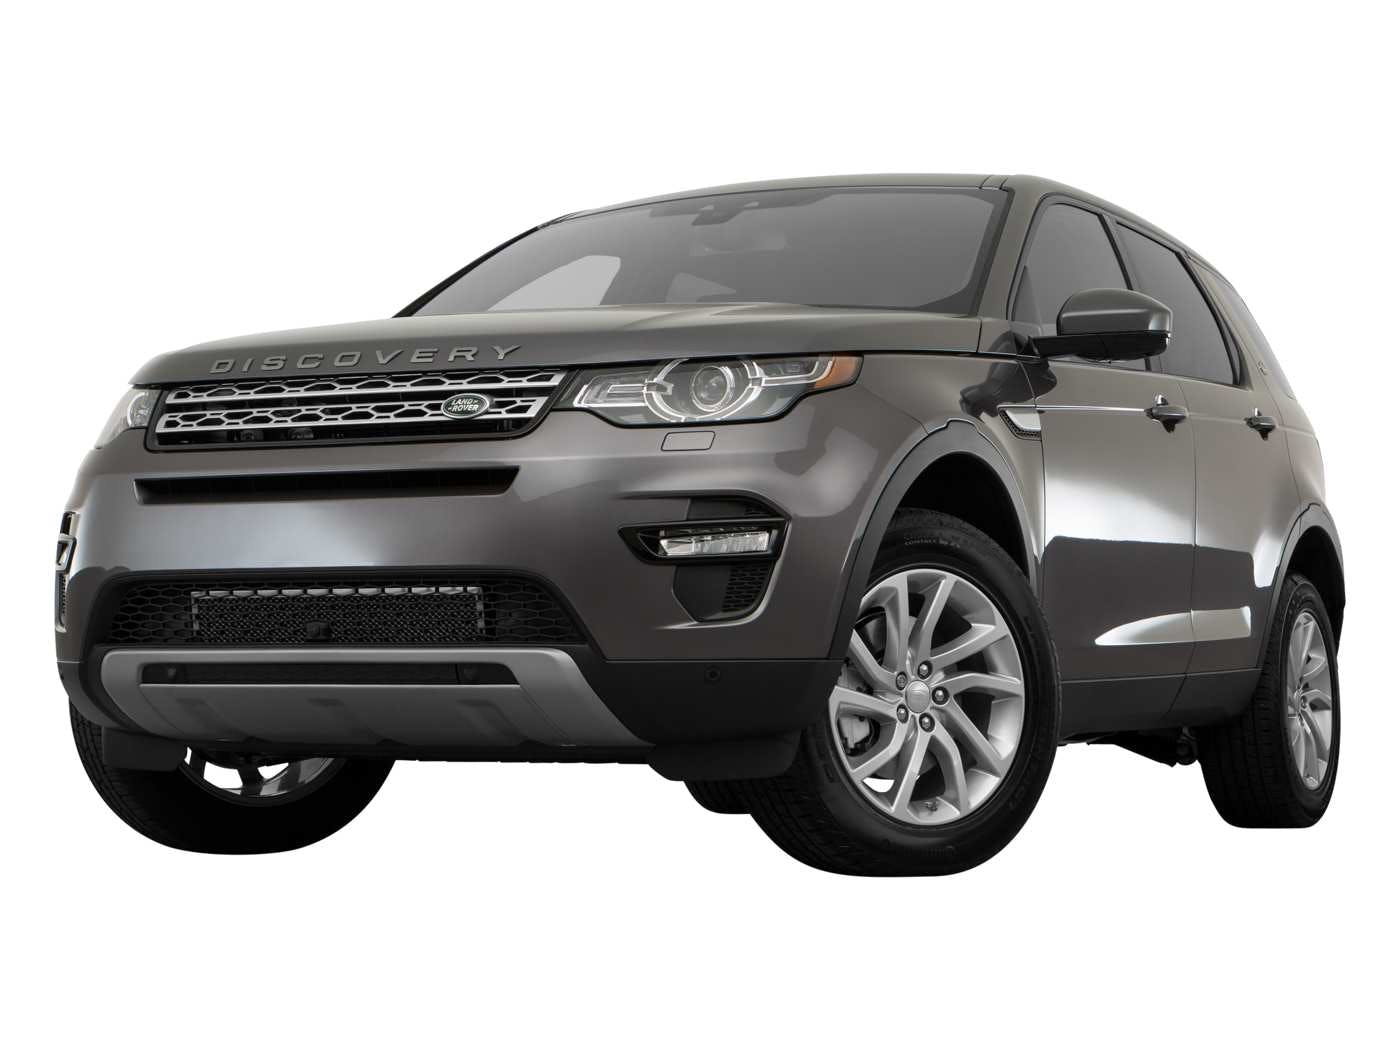 2019 Land Rover Discovery Sport Price, Value, Ratings & Reviews